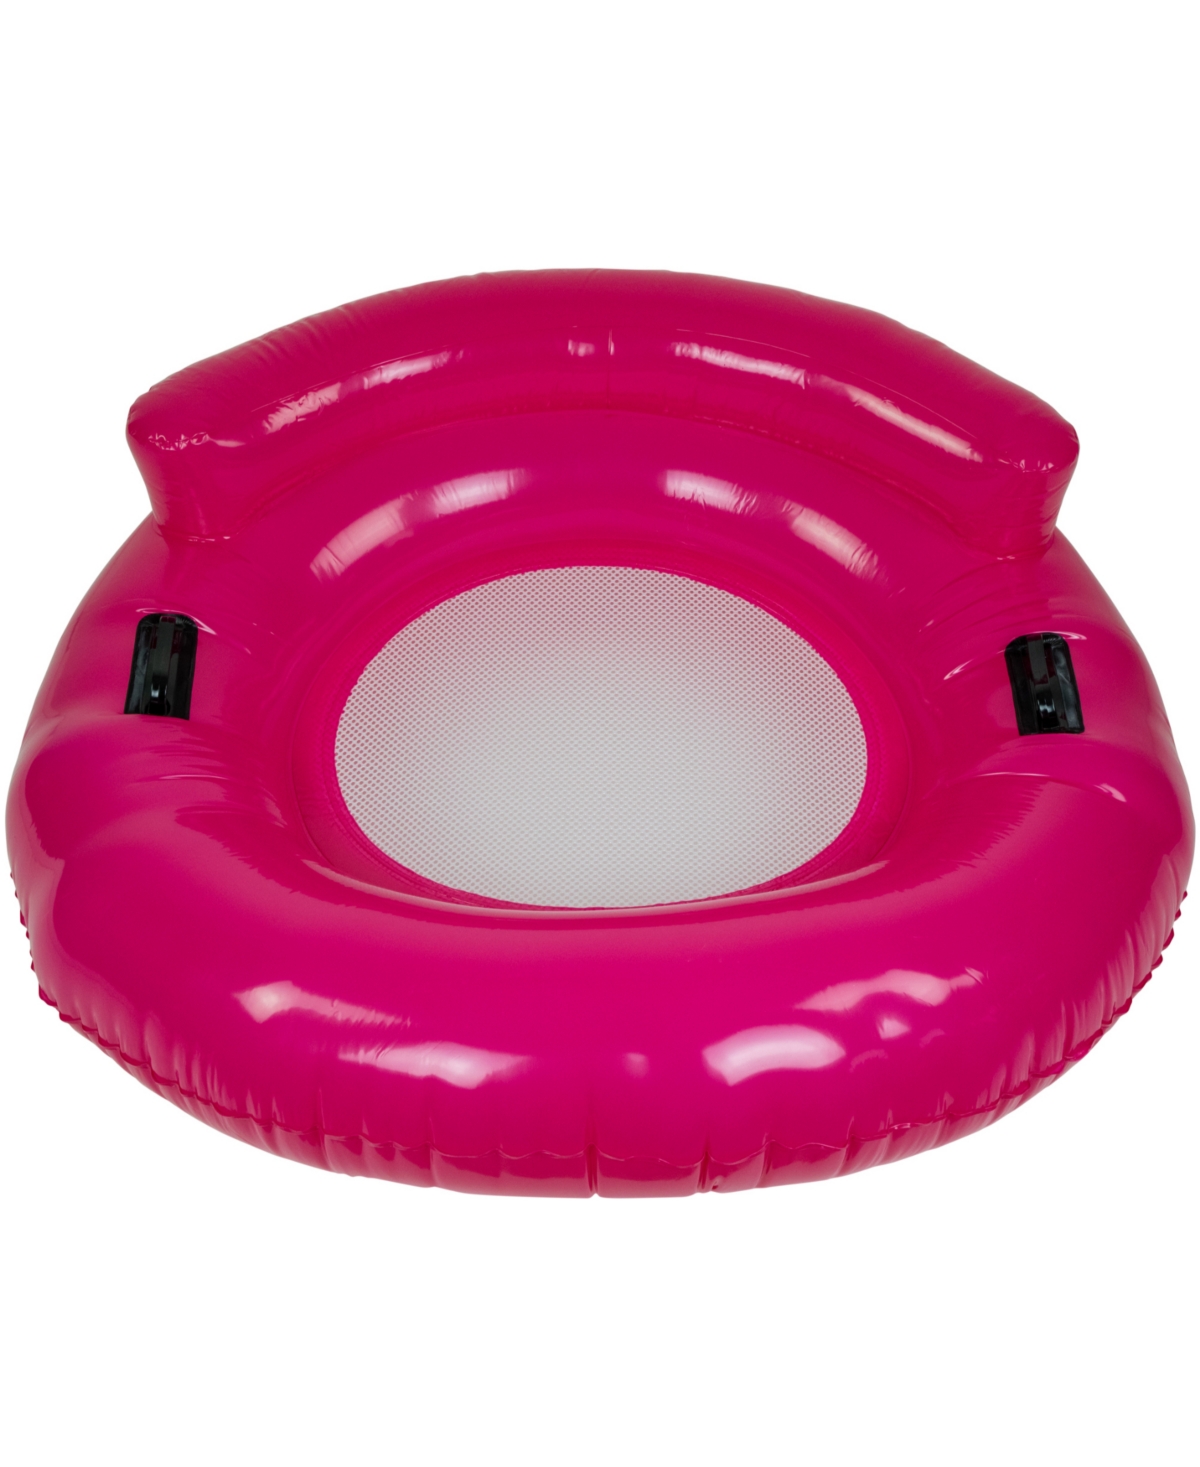 43" Pink Bubble Seat Inflatable Swimming Pool Float - Pink